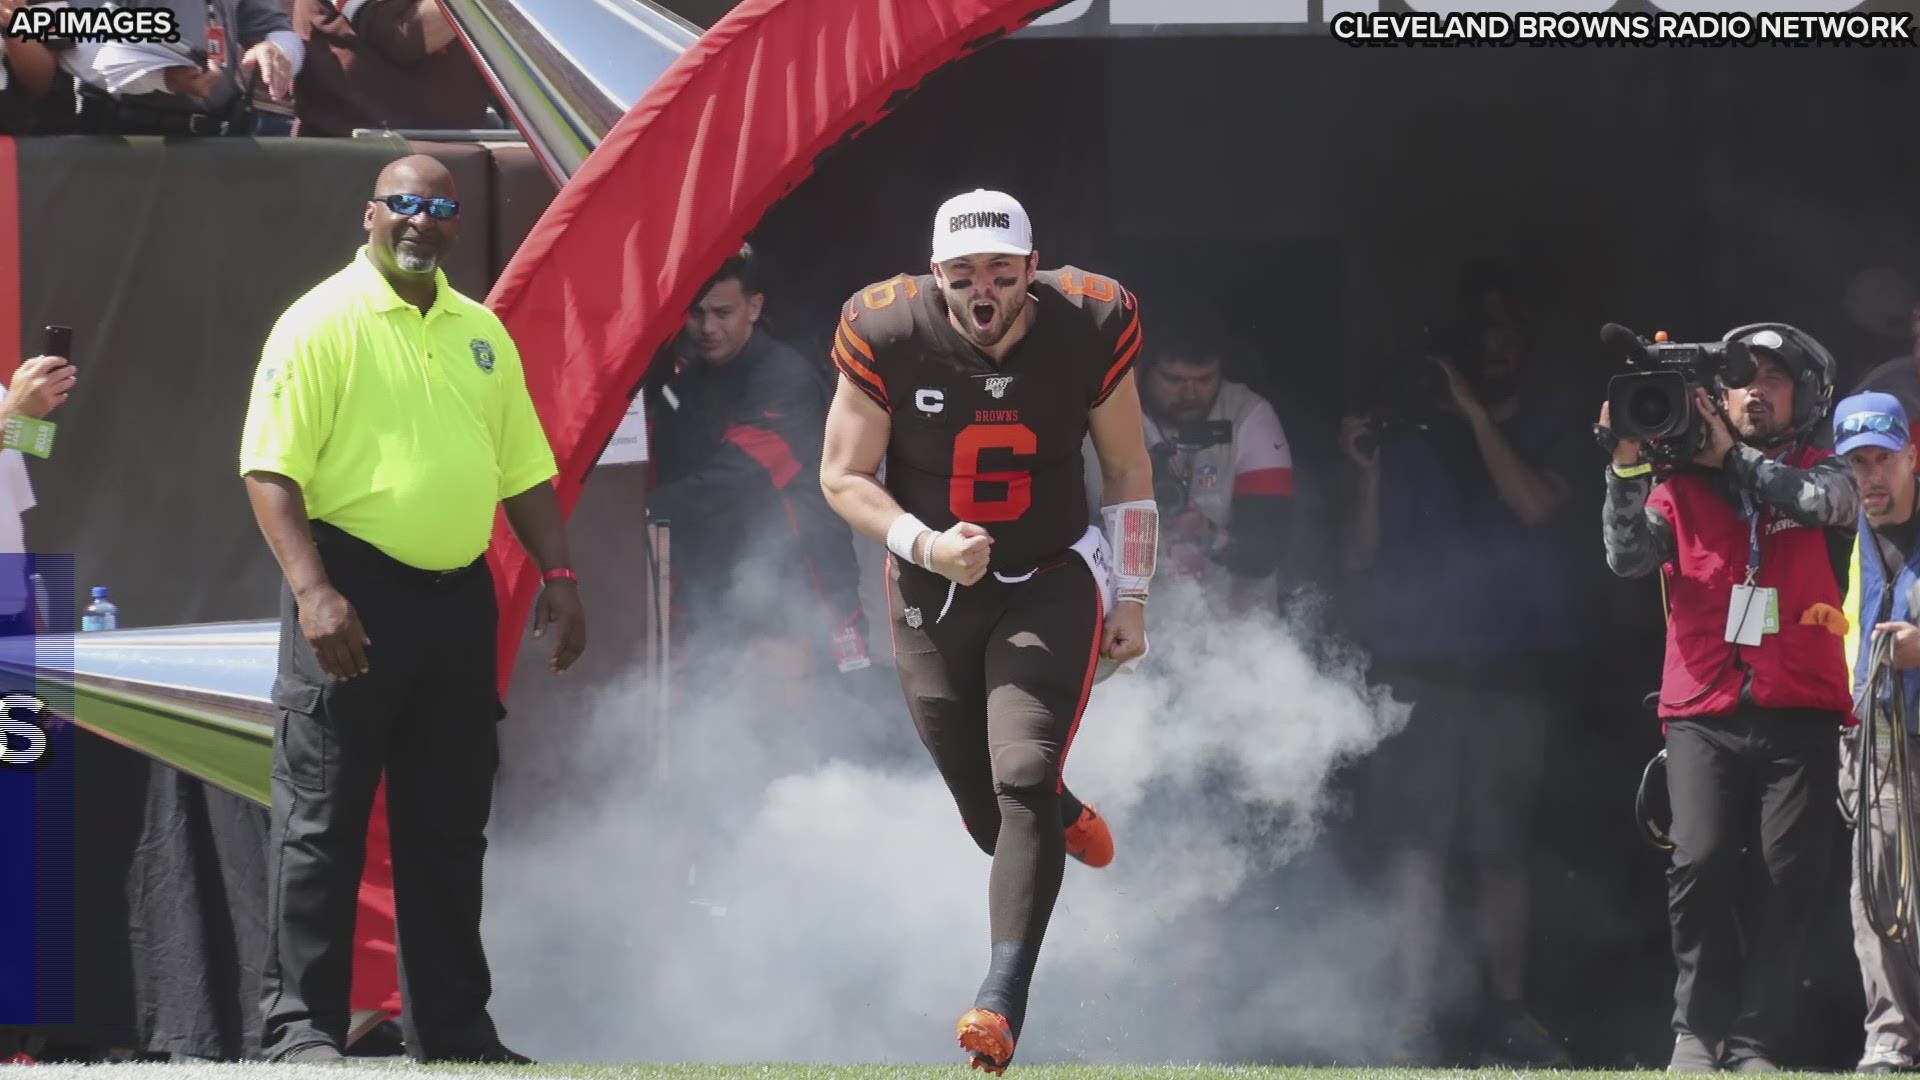 The Cleveland Browns opened the 2019 season with a 43-13 loss to the Tennessee Titans at FirstEnergy Stadium Sunday.